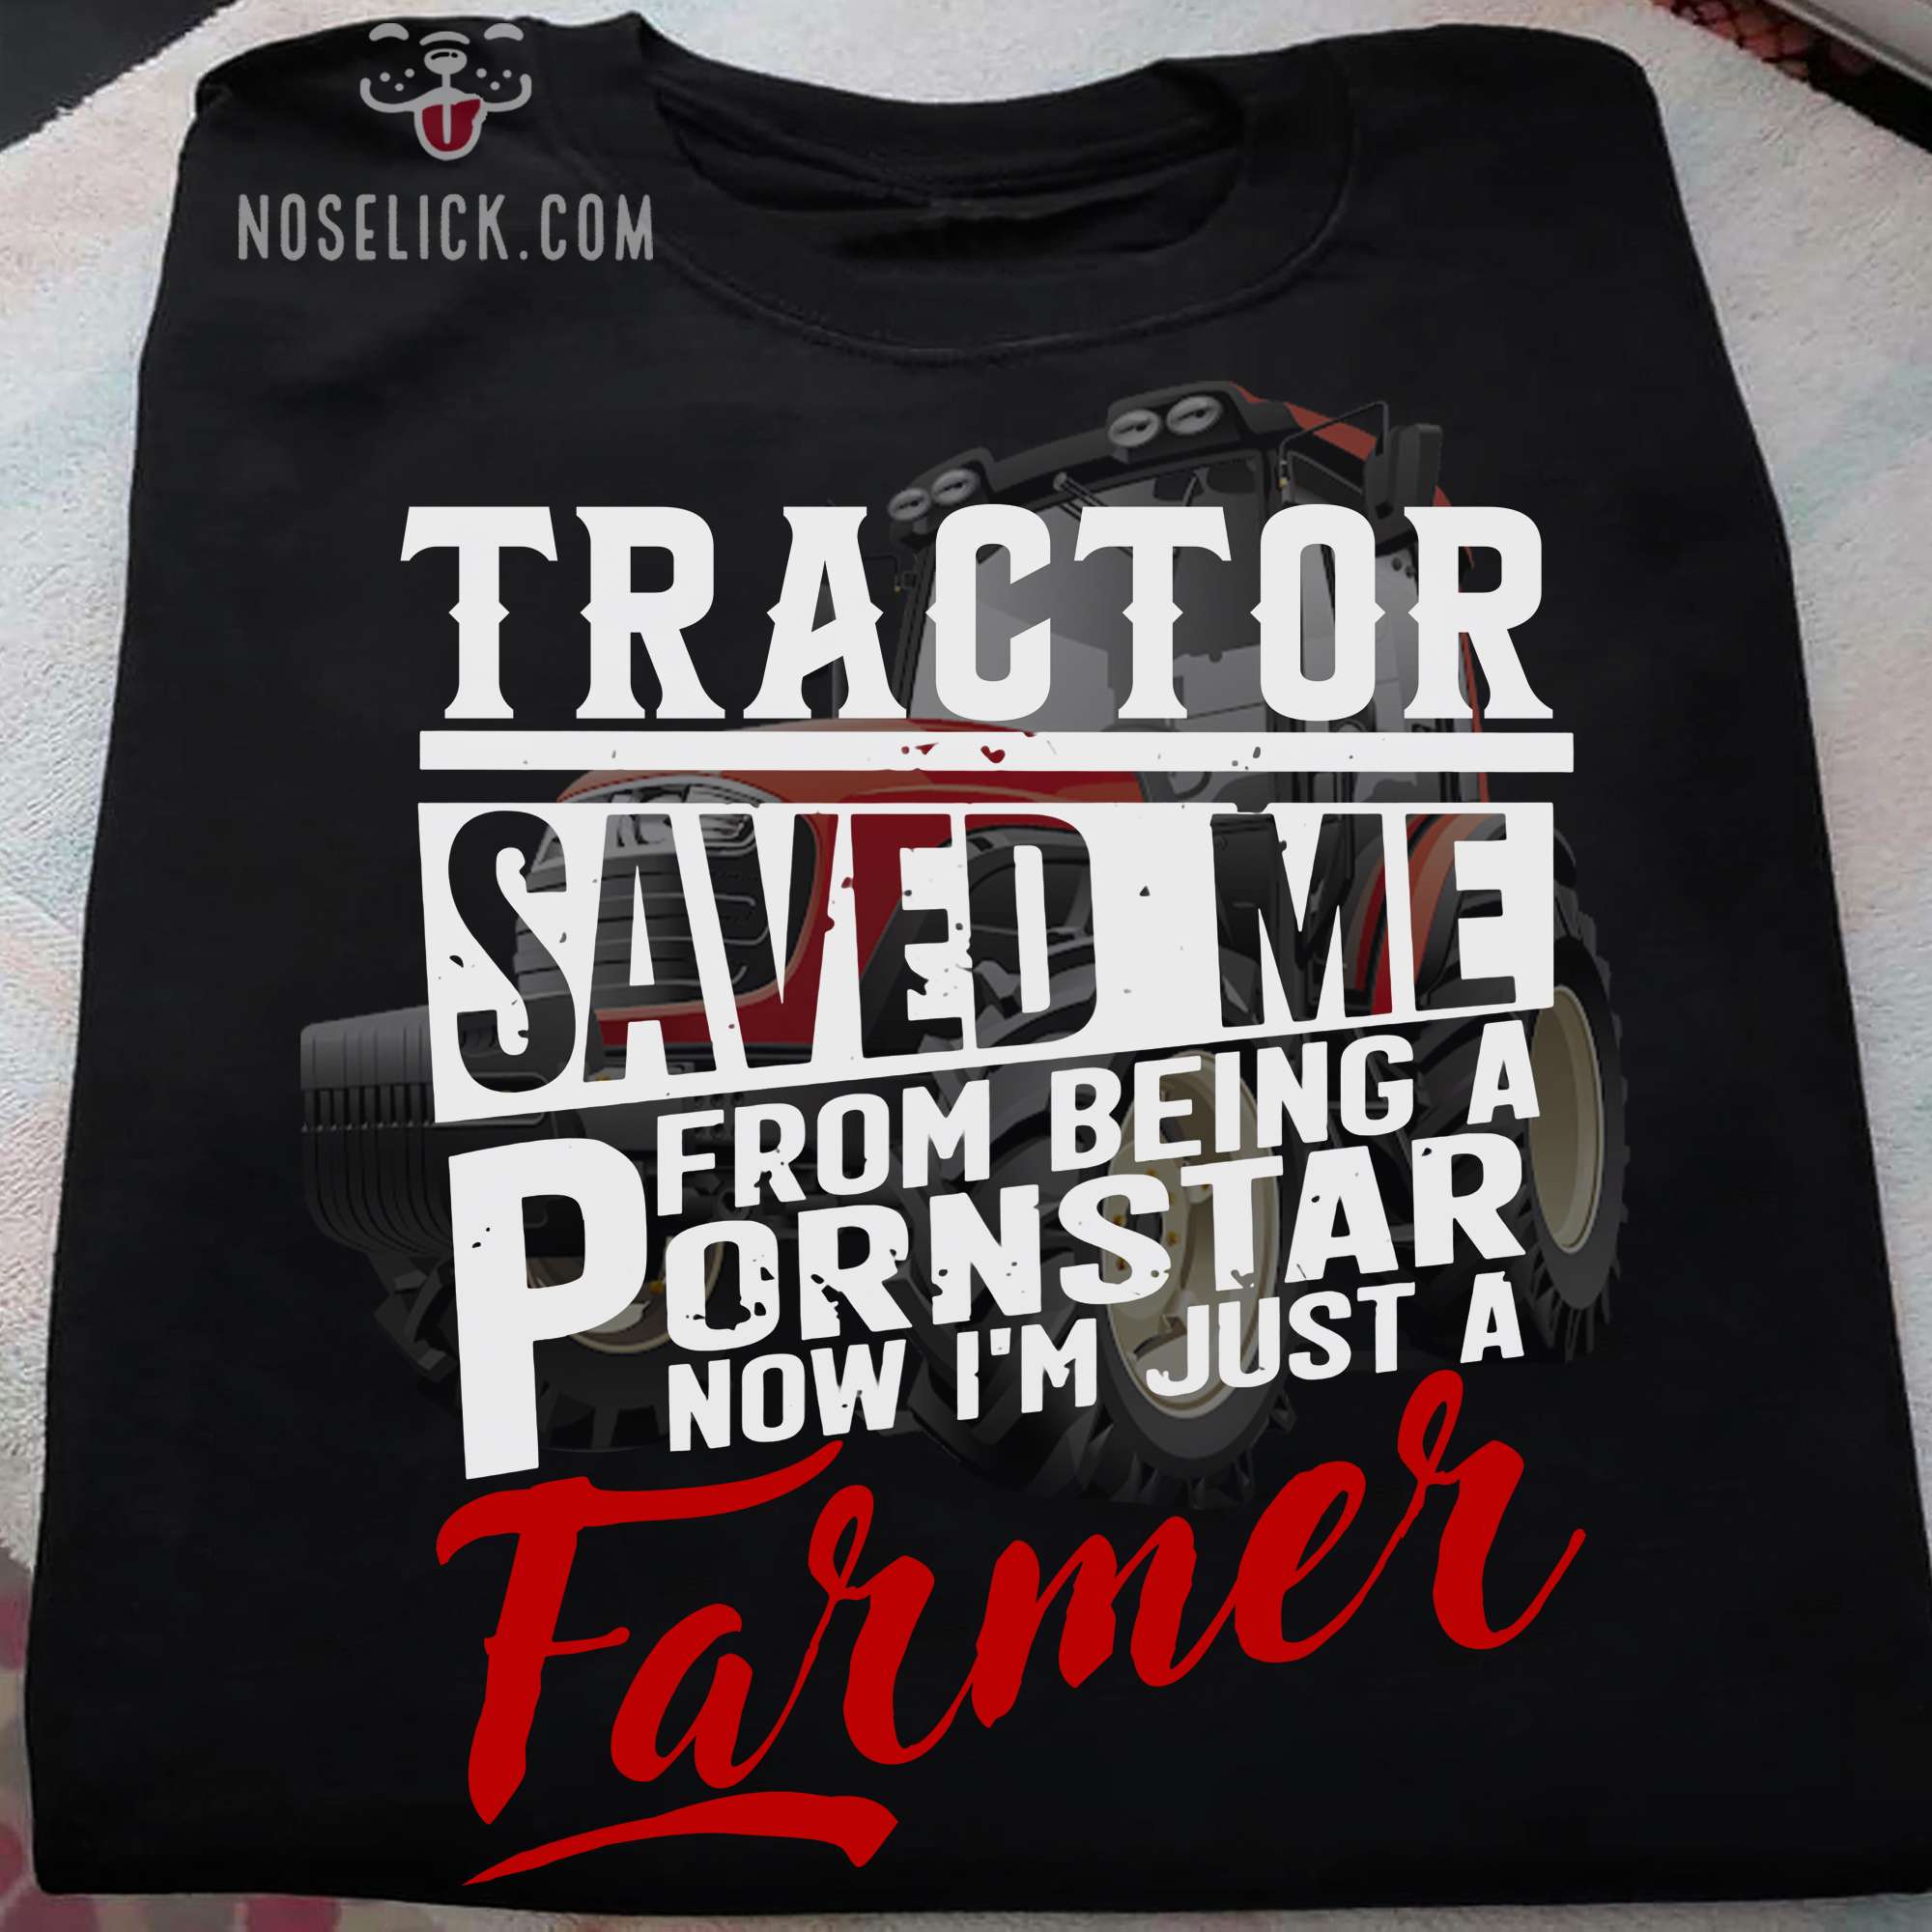 Farm Tractor - Tractor saved me from being a pornstar now i'm just a farmer